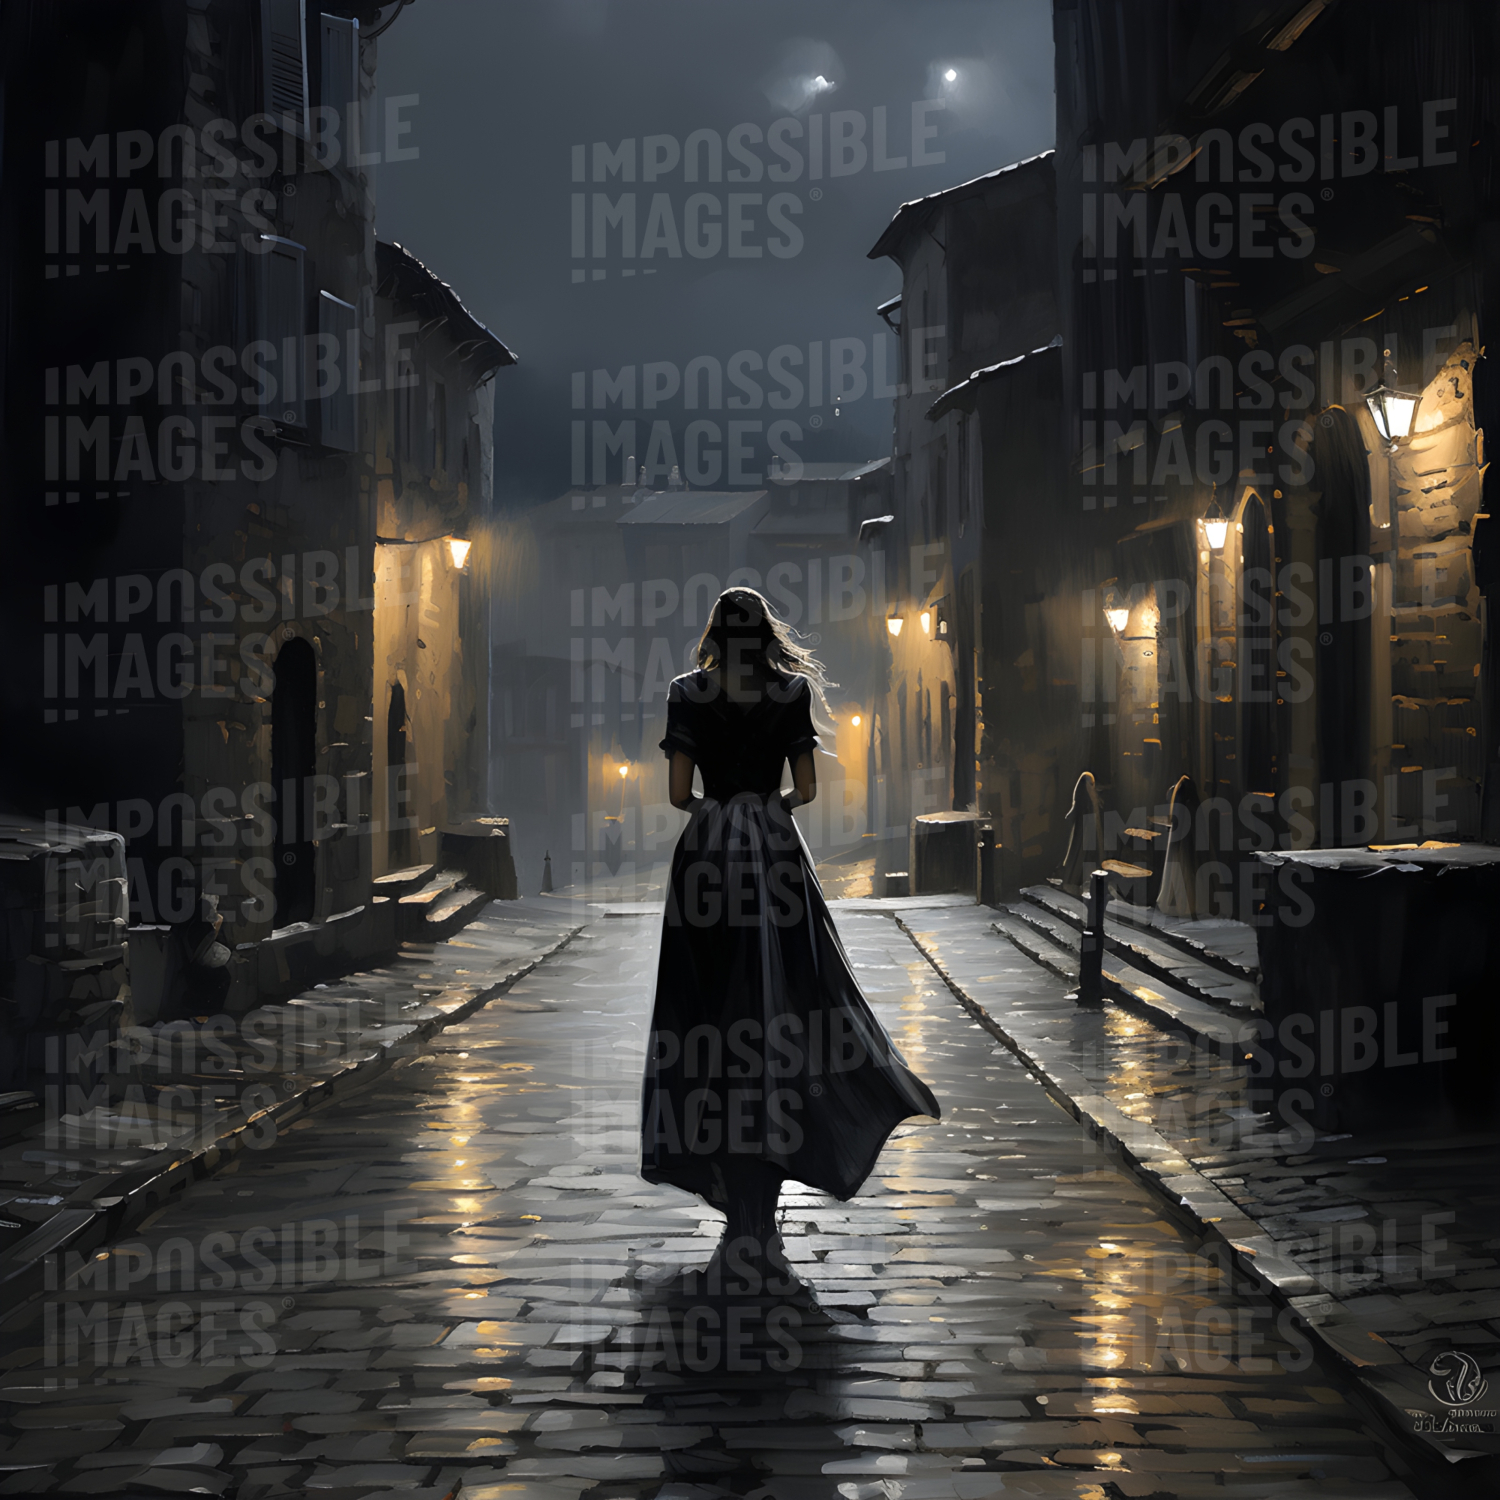 A woman at night on a dimly lit street - 